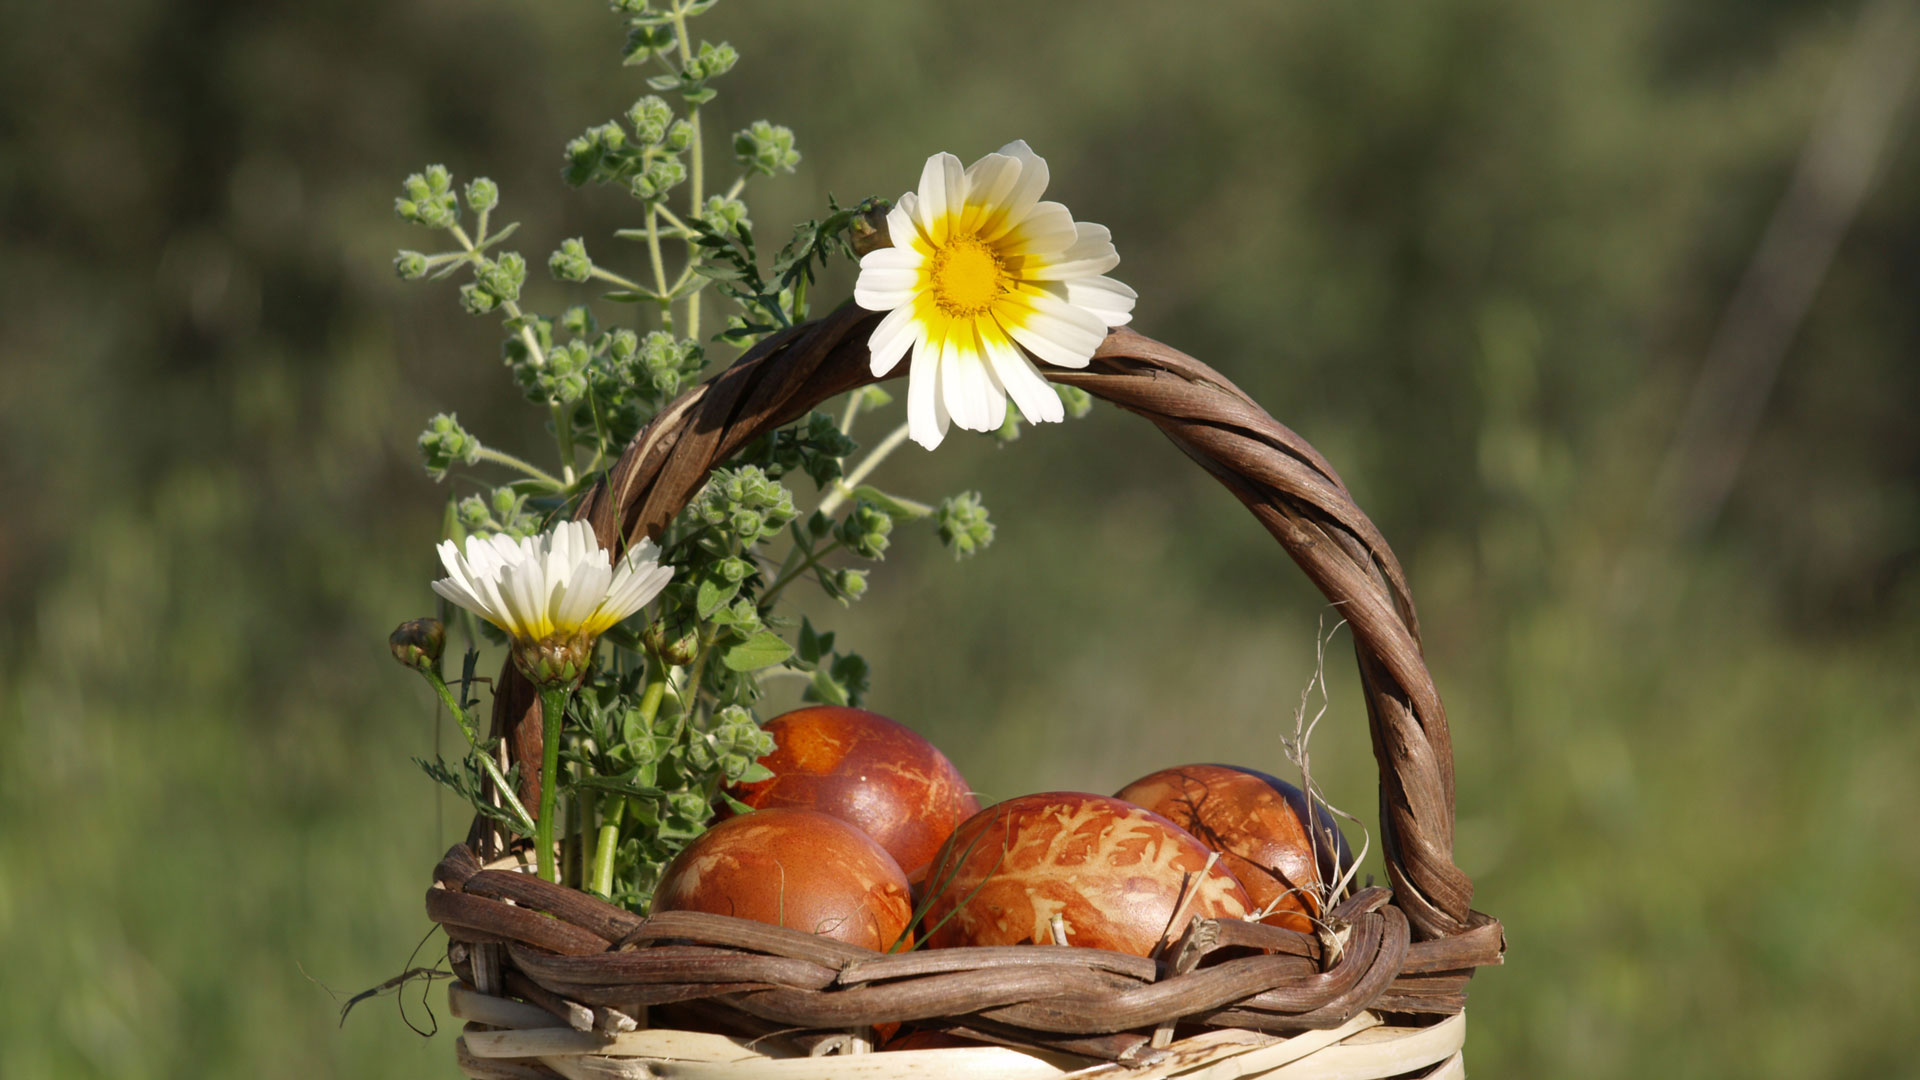 Experience Easter in Chroussiano Farmhouse